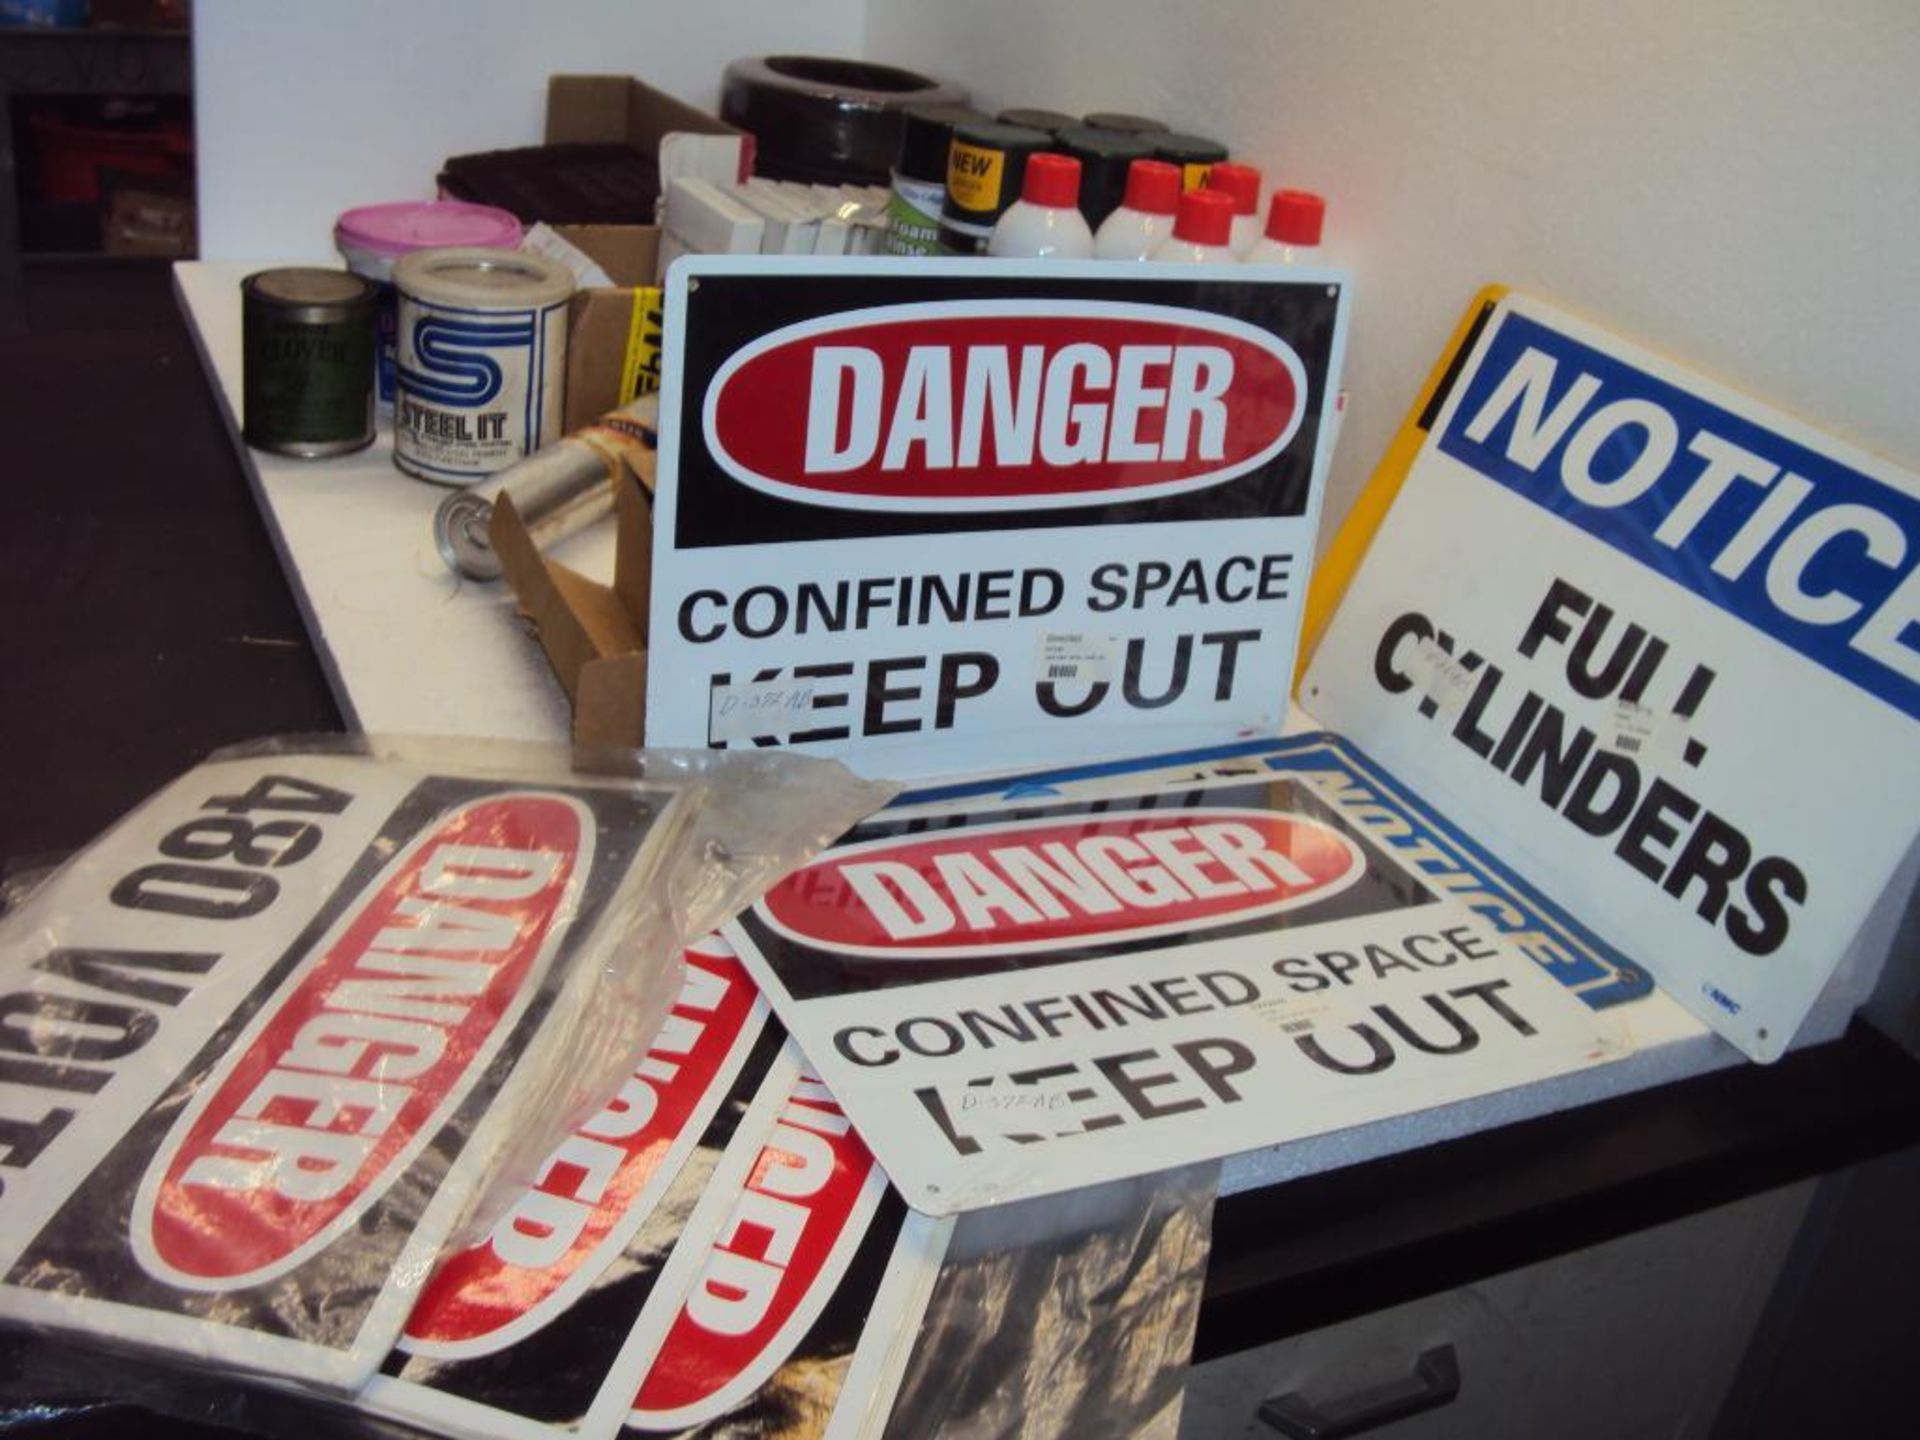 Shop Supplies Signs, cleaners, shim stock and lubricants - Image 8 of 8